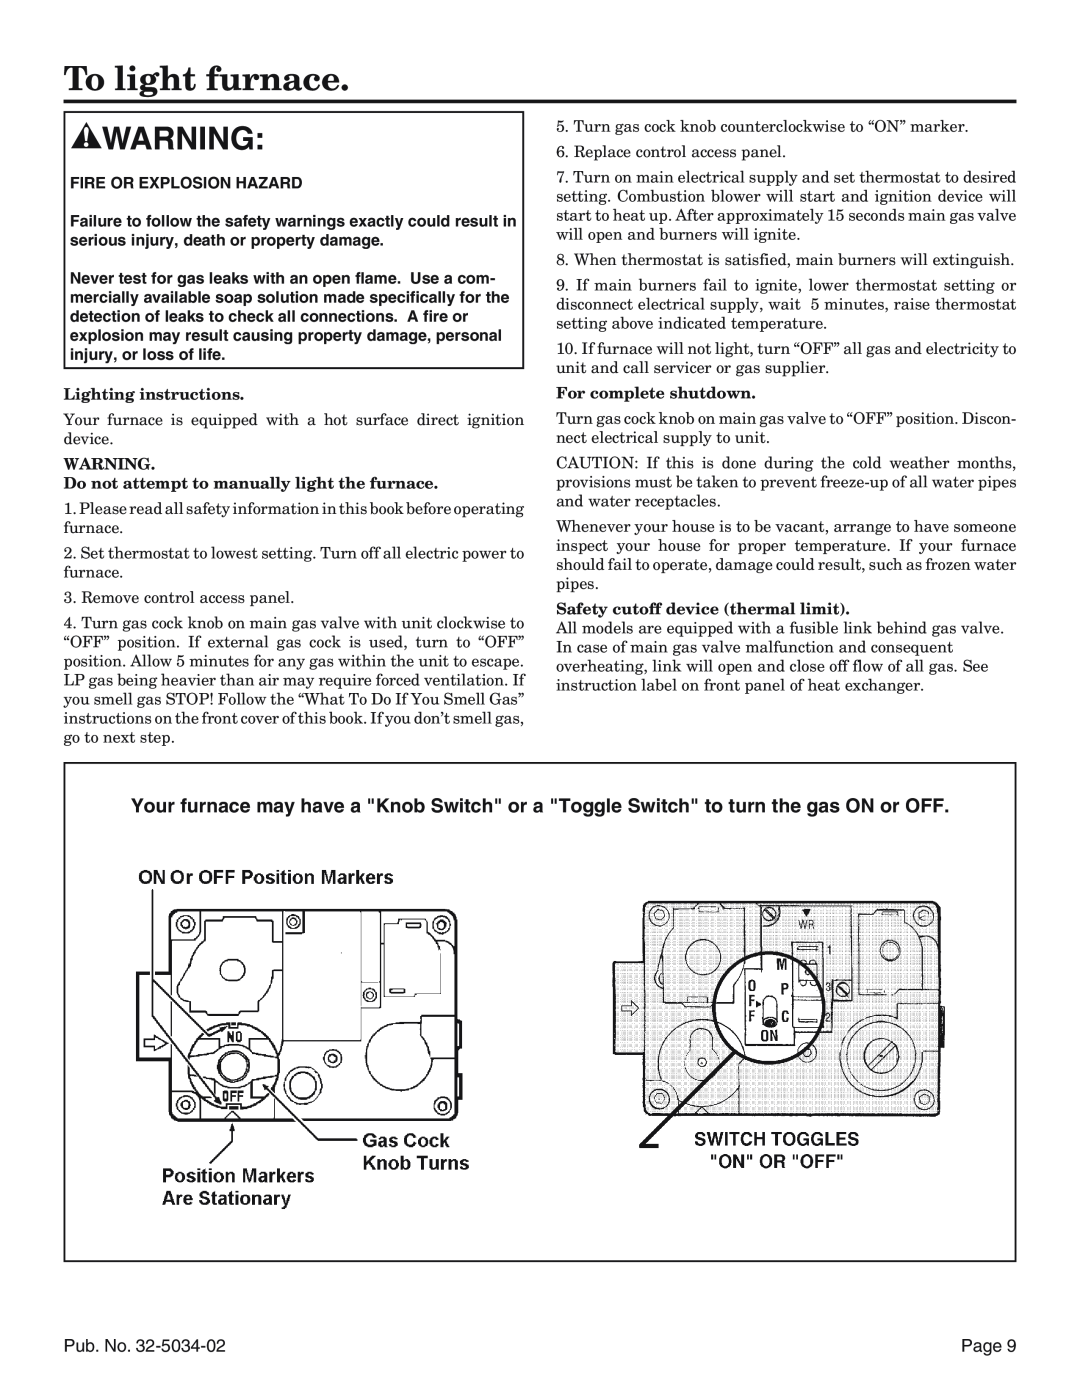 American Standard Noncondensing Gas Furnaces manual To light furnace, Lighting instructions, For complete shutdown 